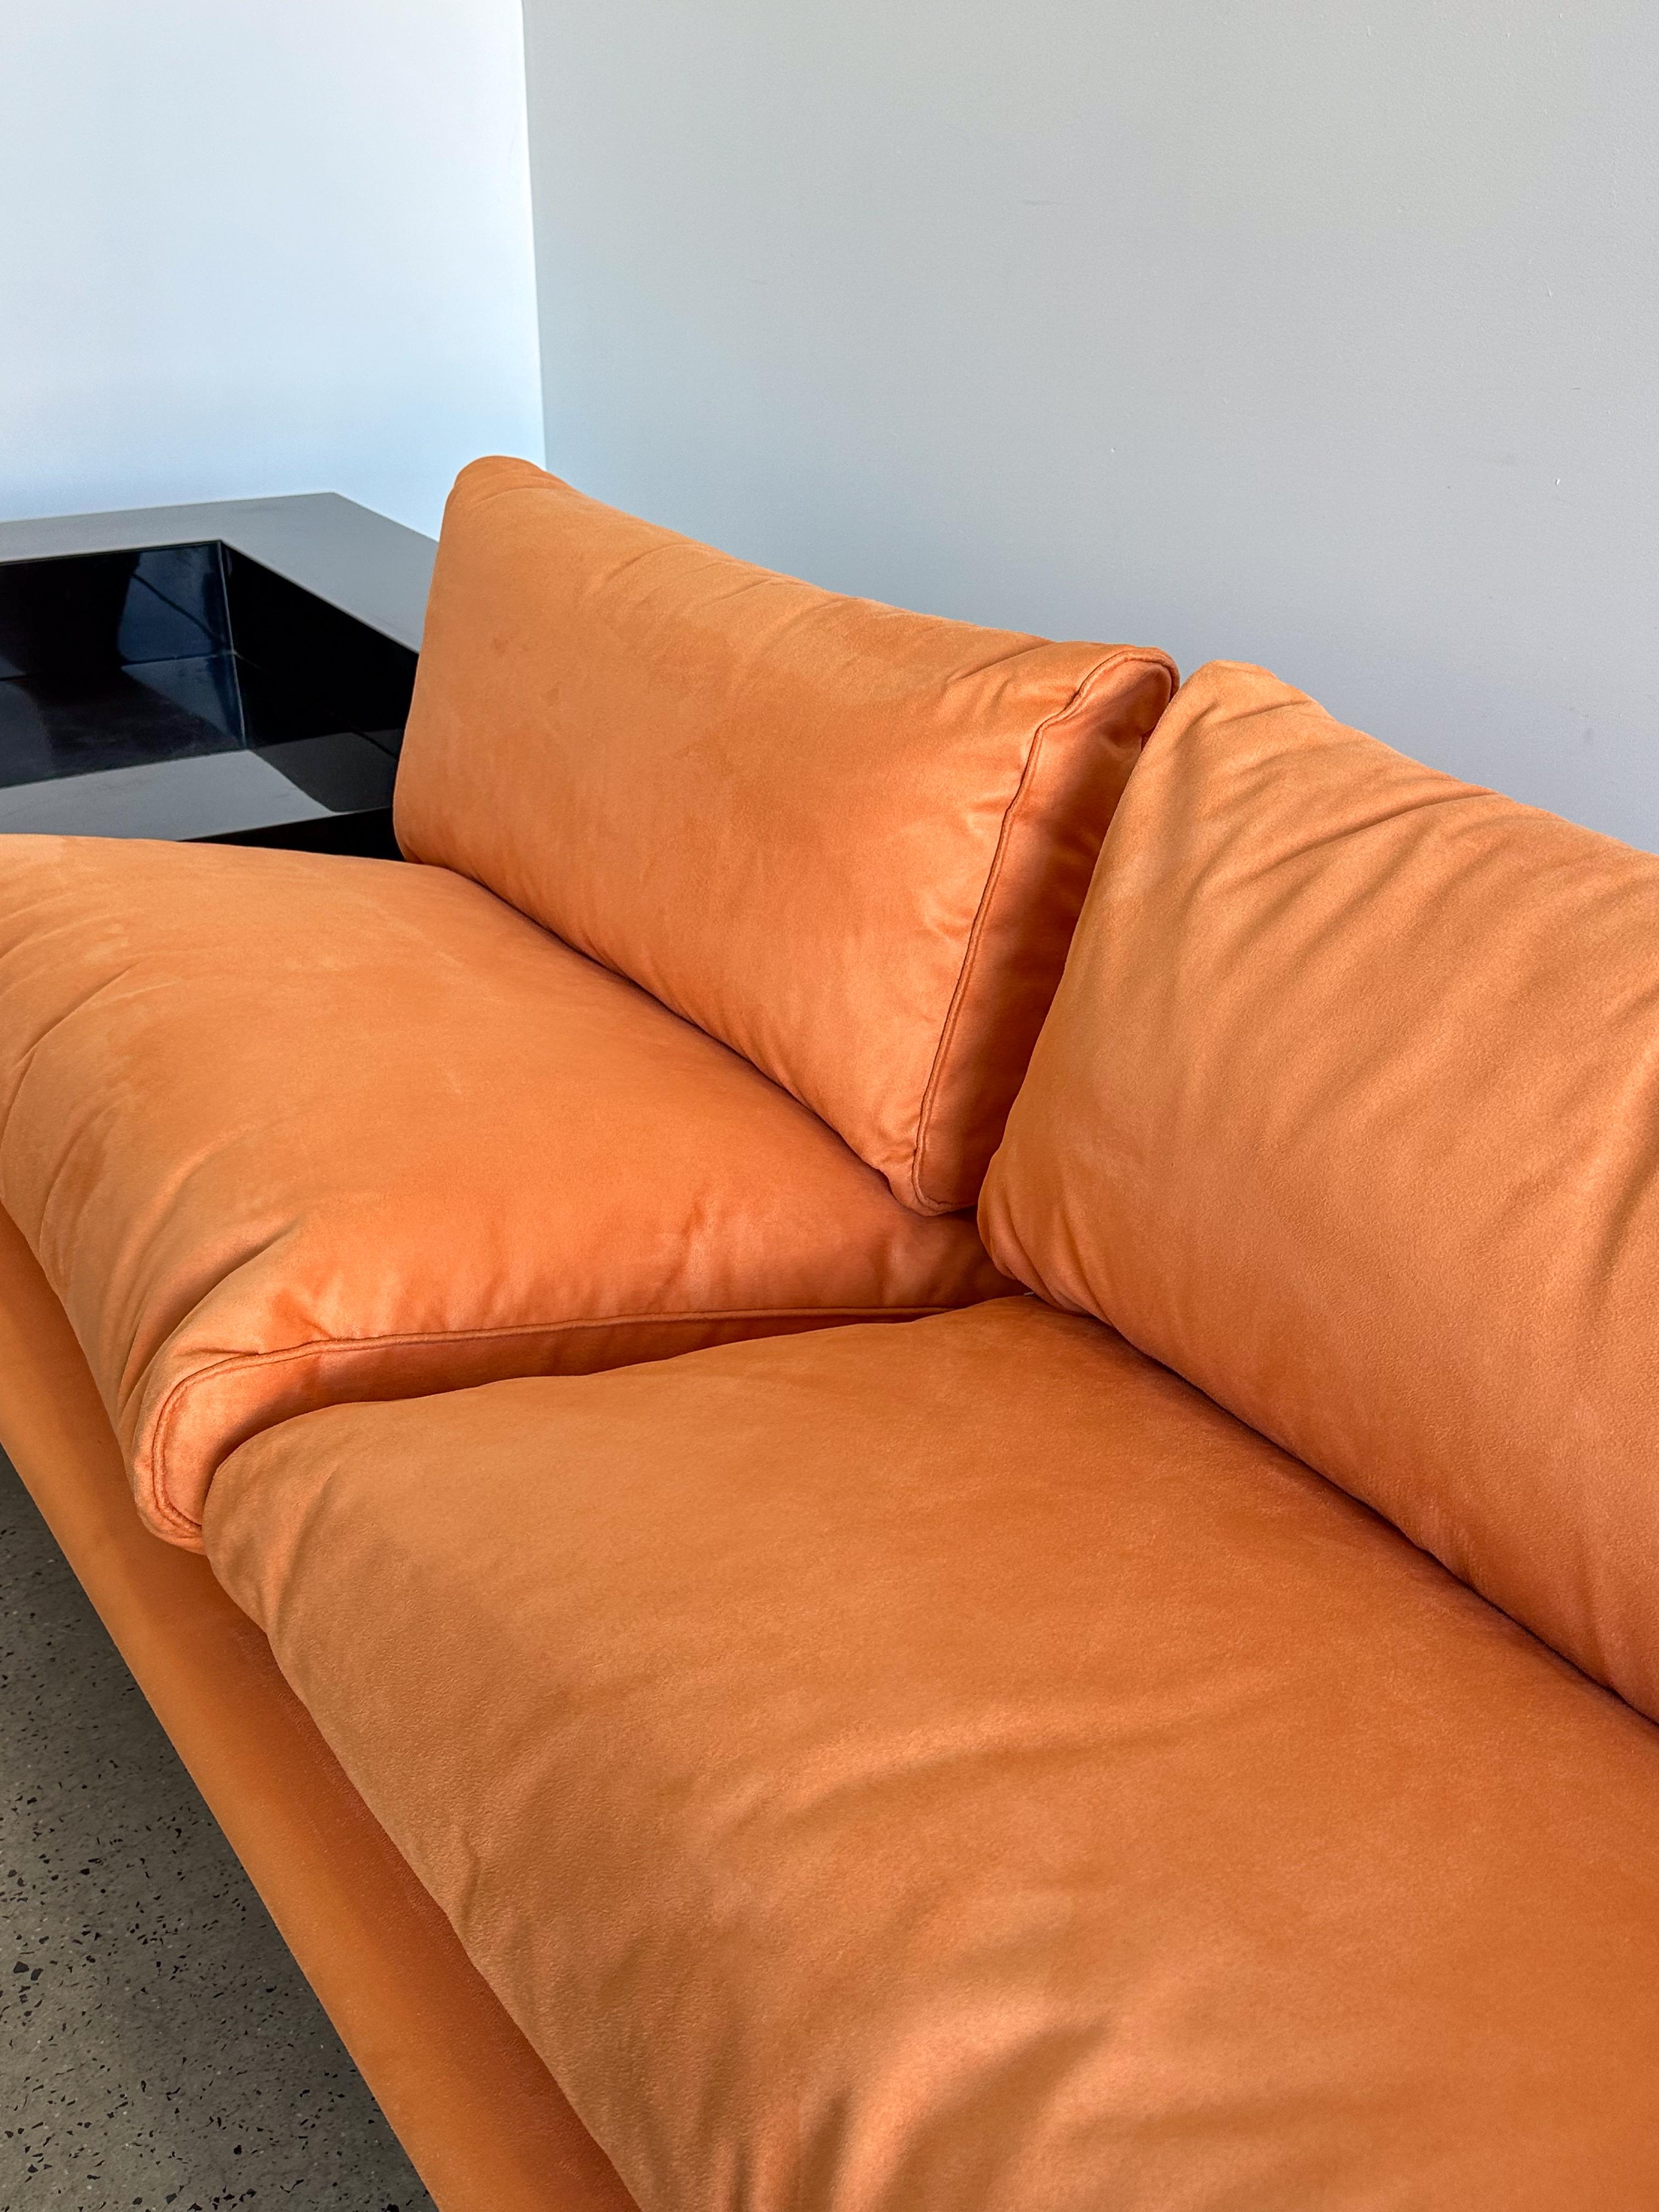 Late 20th Century Arflex L Shape Black Lacquered Sofa with Light Suede Orange Cushions  For Sale